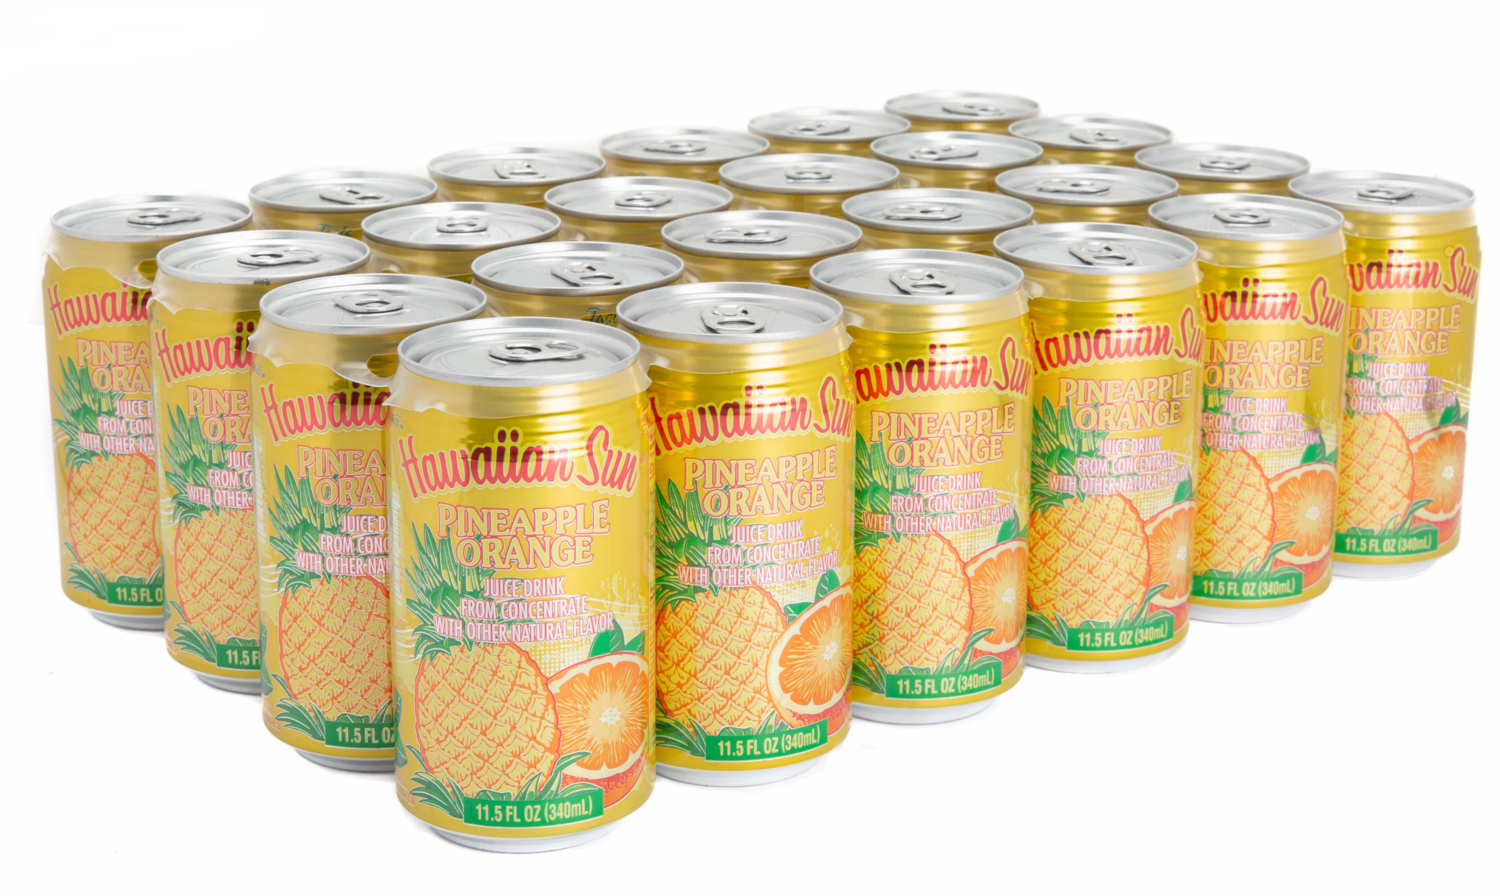 Hawaiian Sun Drink - Pineapple Orange 11.5 oz (Pack of 24) **Limit 2 total cases per purchase transaction**